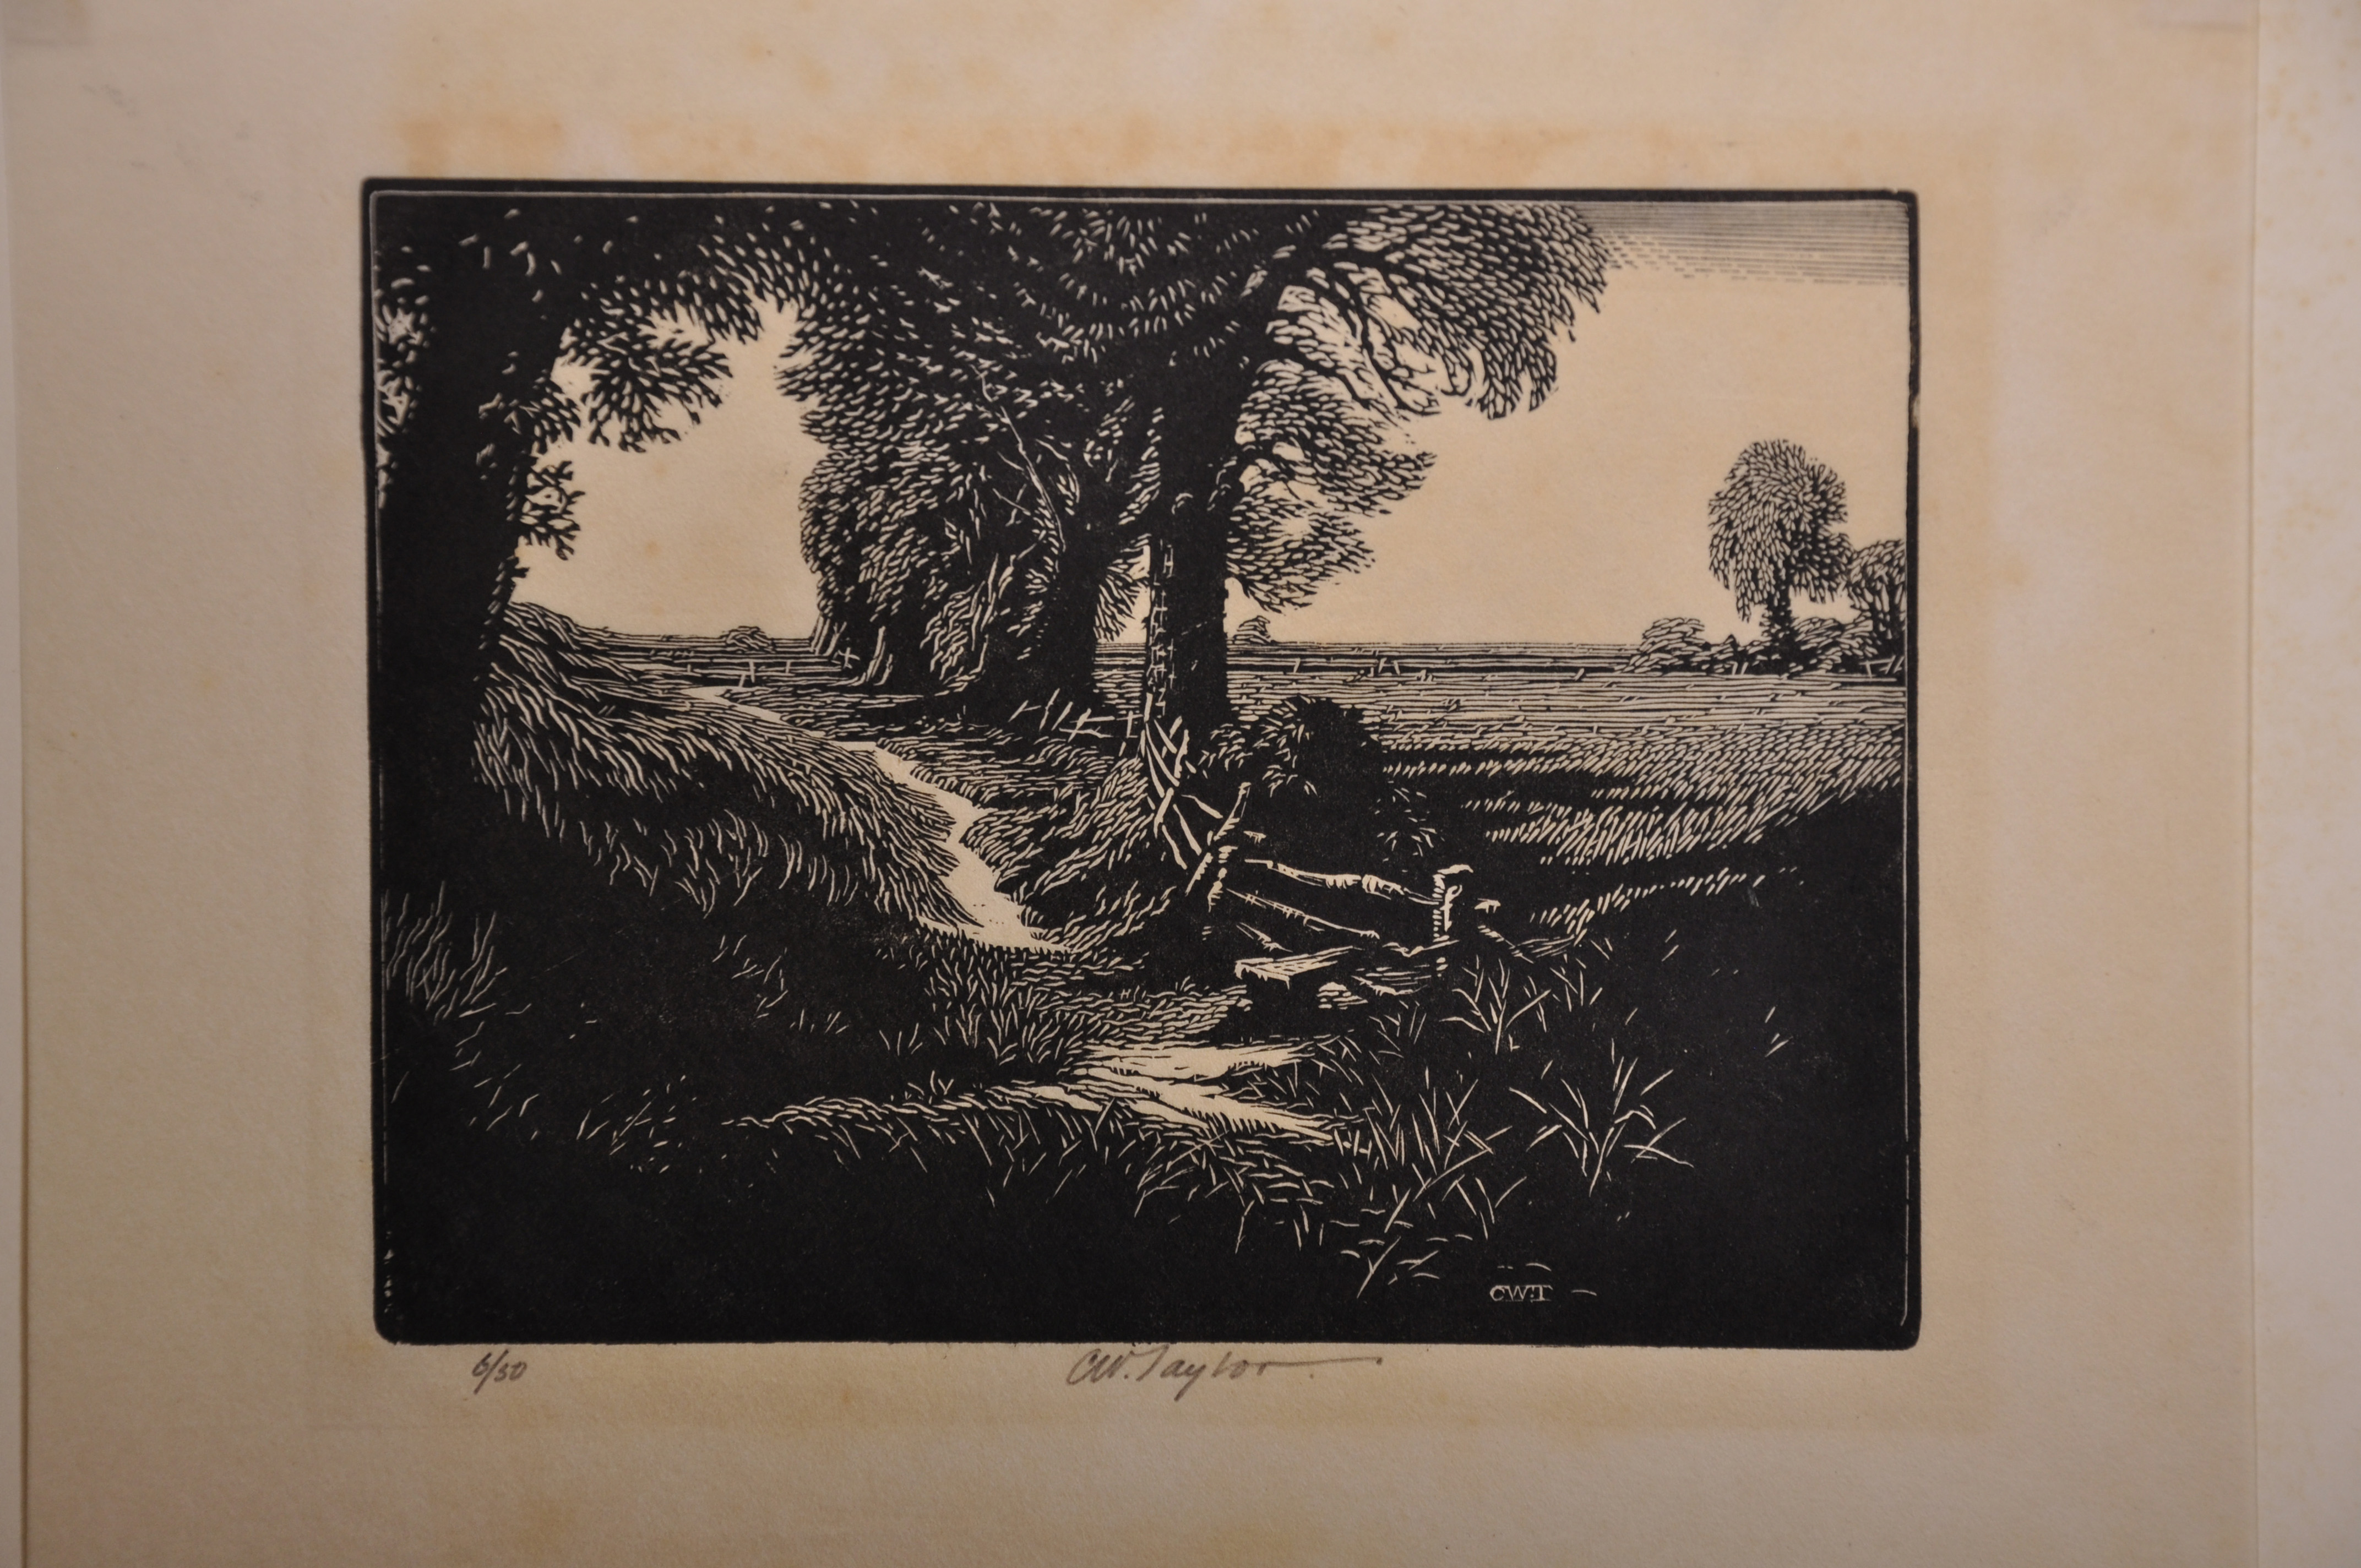 Charles William Taylor (1878-1960) British. “Essex”, Woodcut, Signed and Inscribed in Pencil, - Image 4 of 6